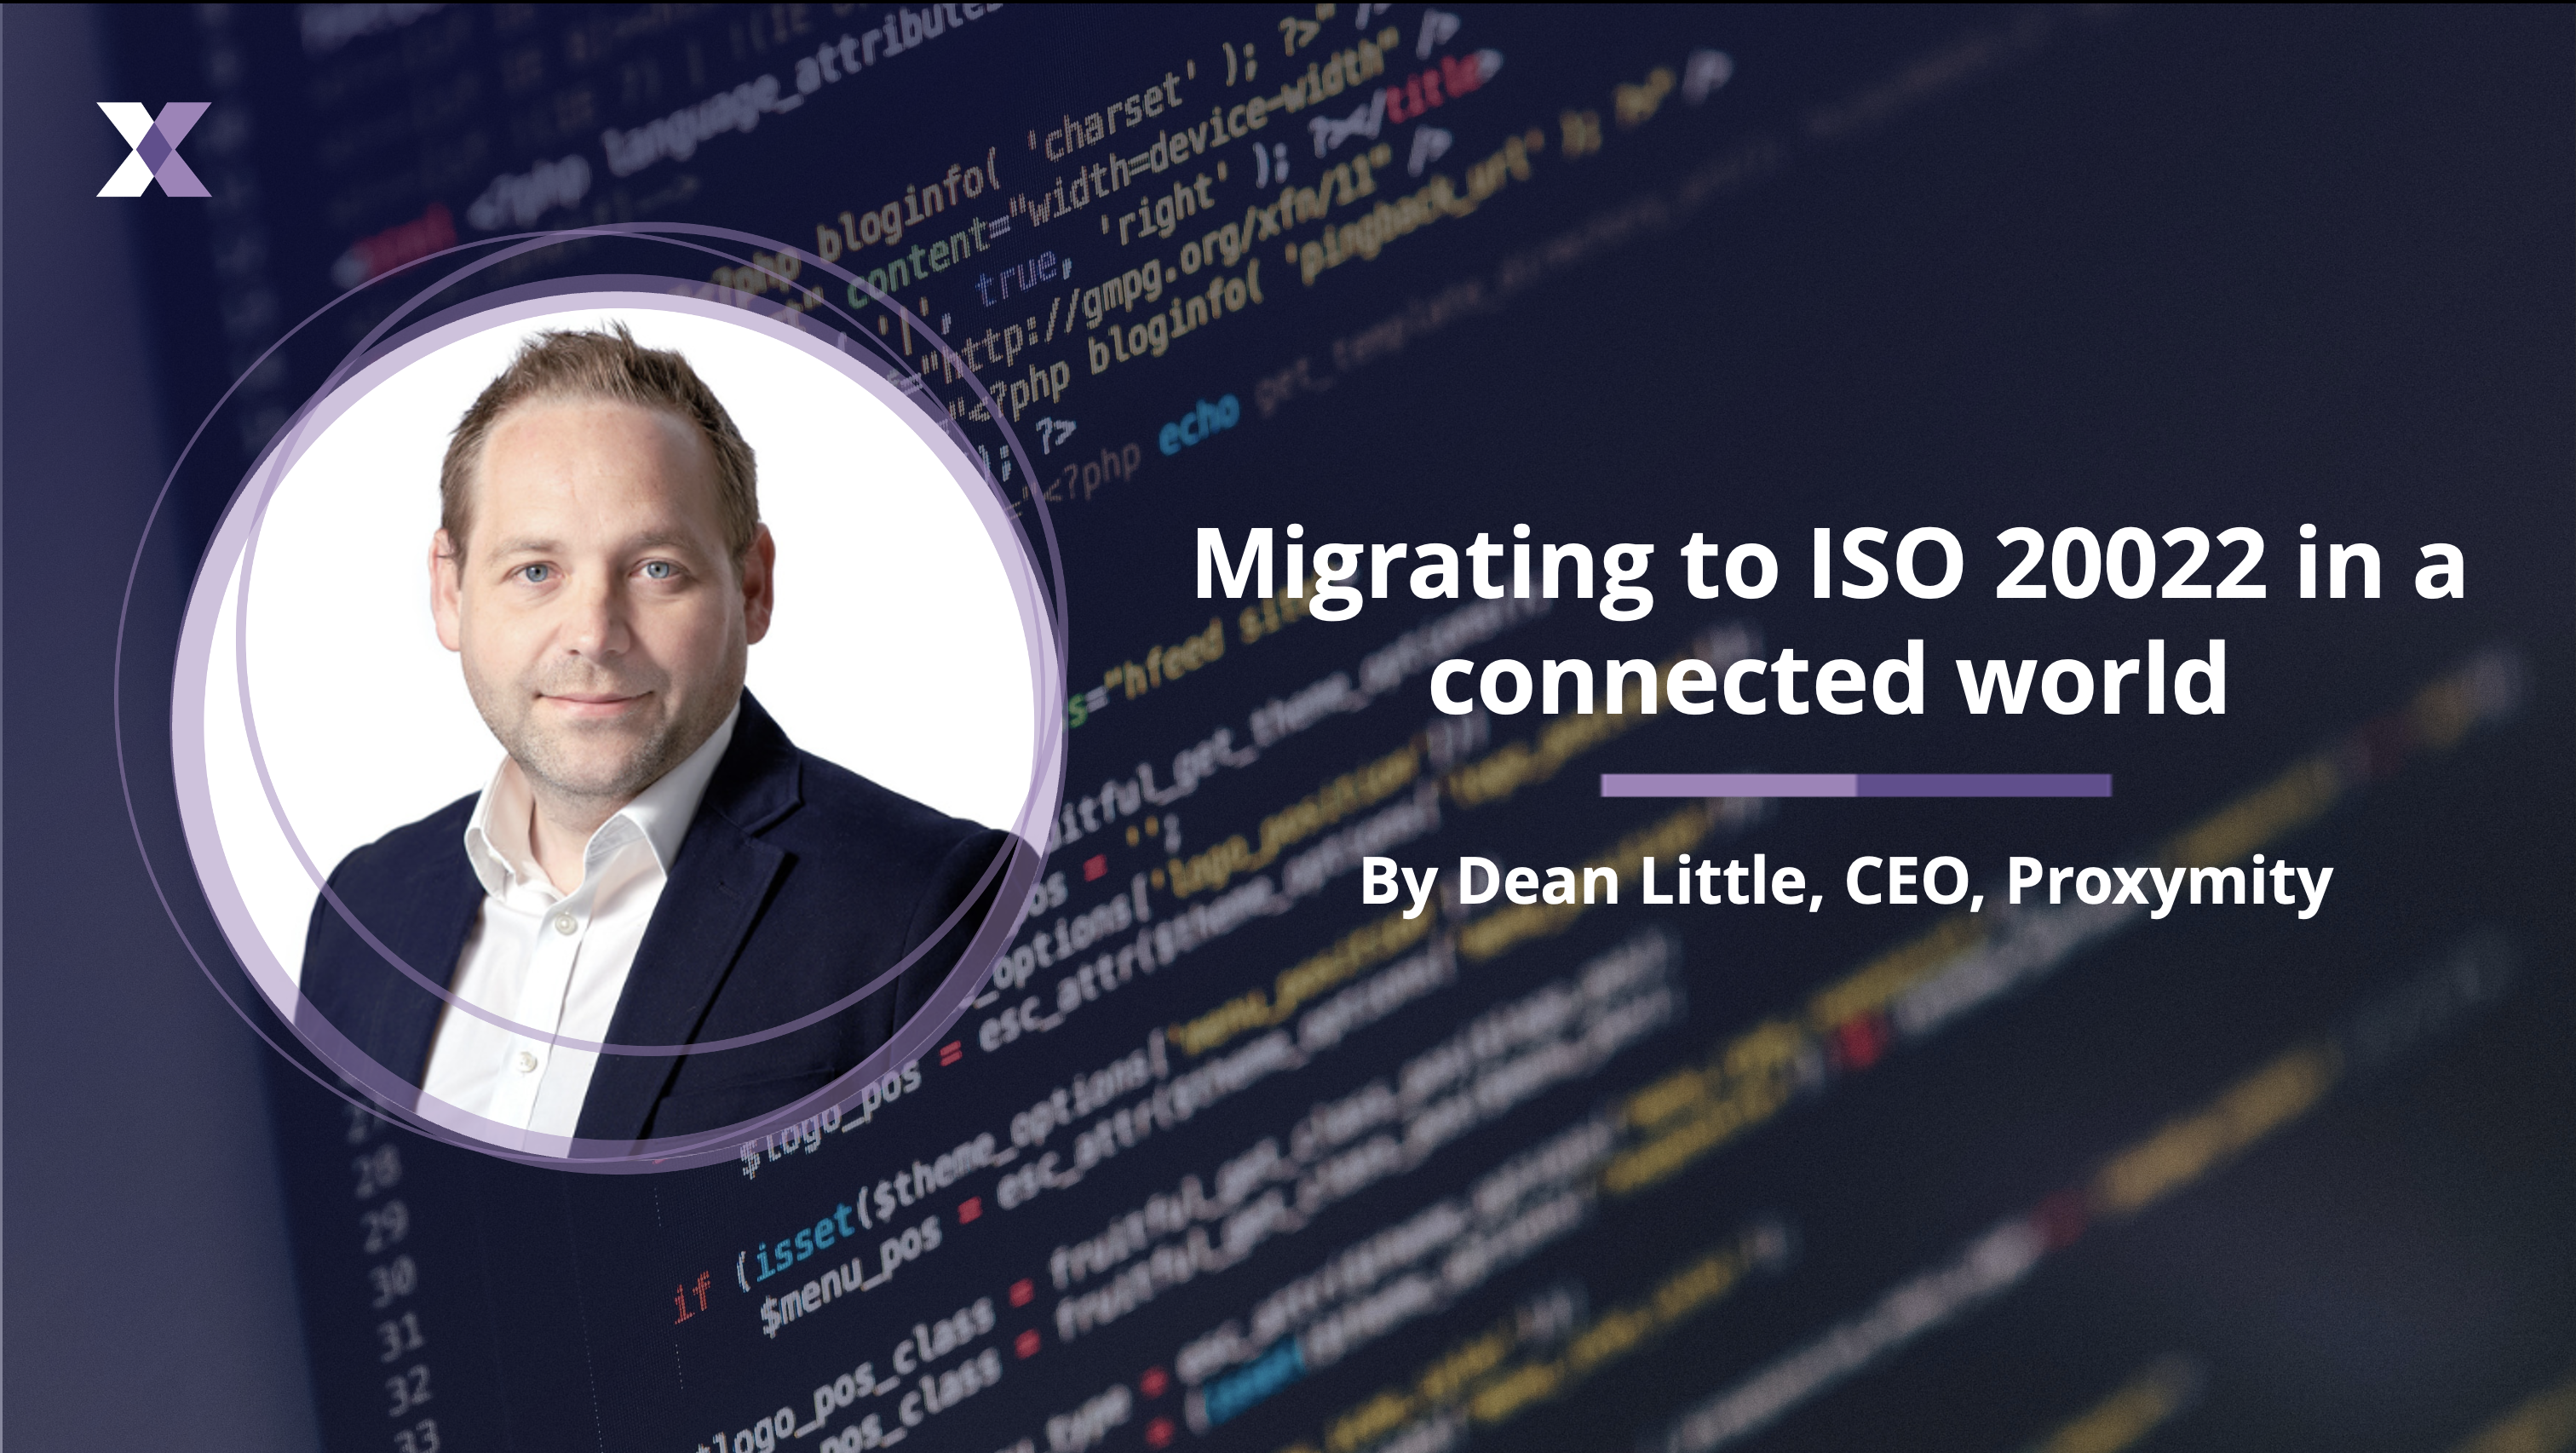 Migrating to ISO 20022 in a connected world